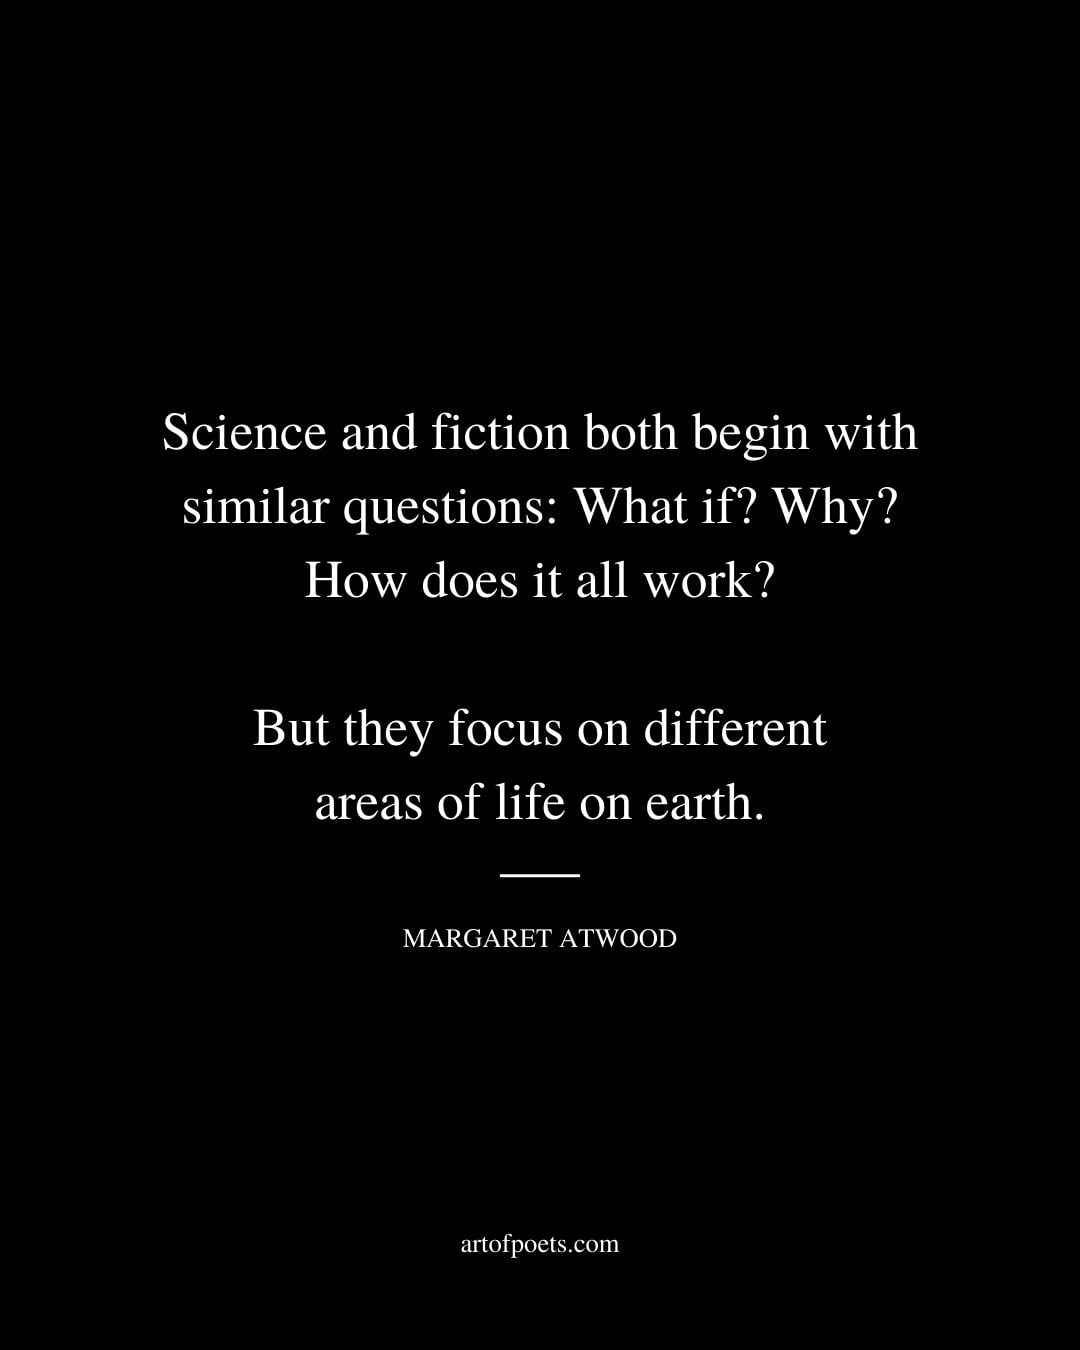 Science and fiction both begin with similar questions What if Why How does it all work But they focus on different areas of life on earth